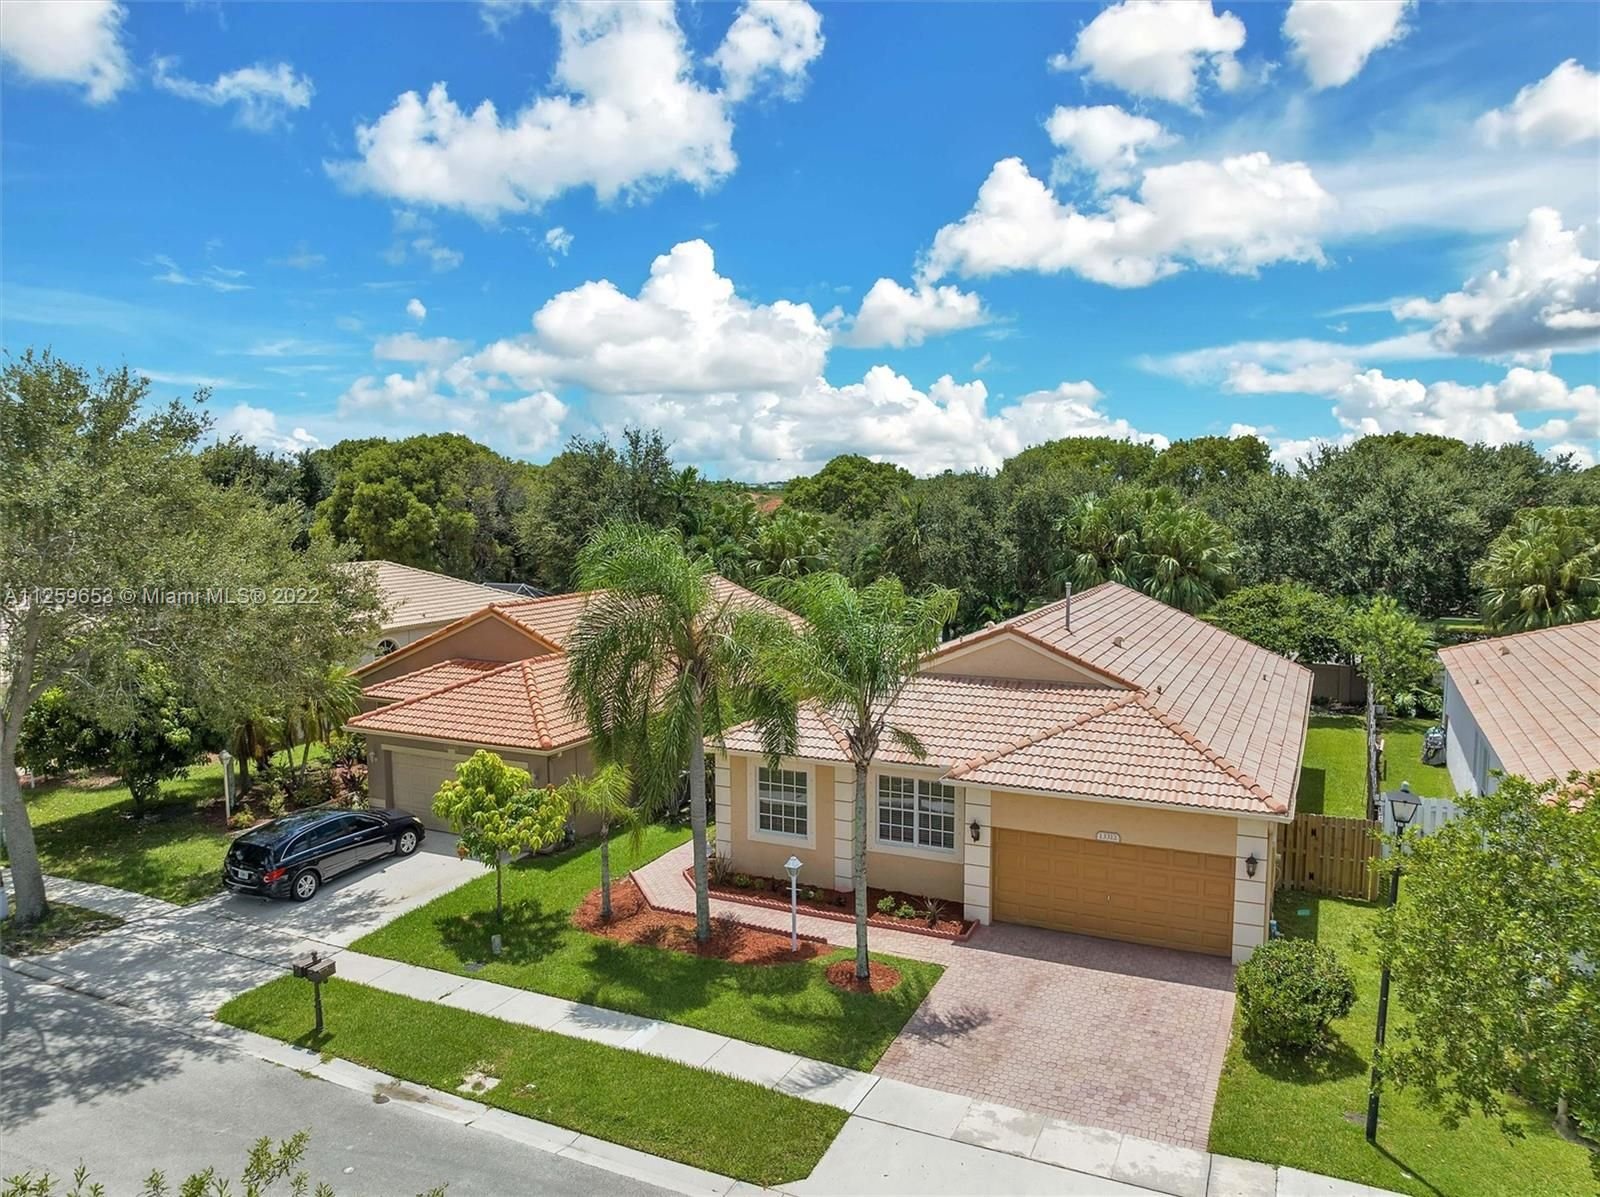 Real estate property located at 13312 11th St, Broward County, Pembroke Pines, FL